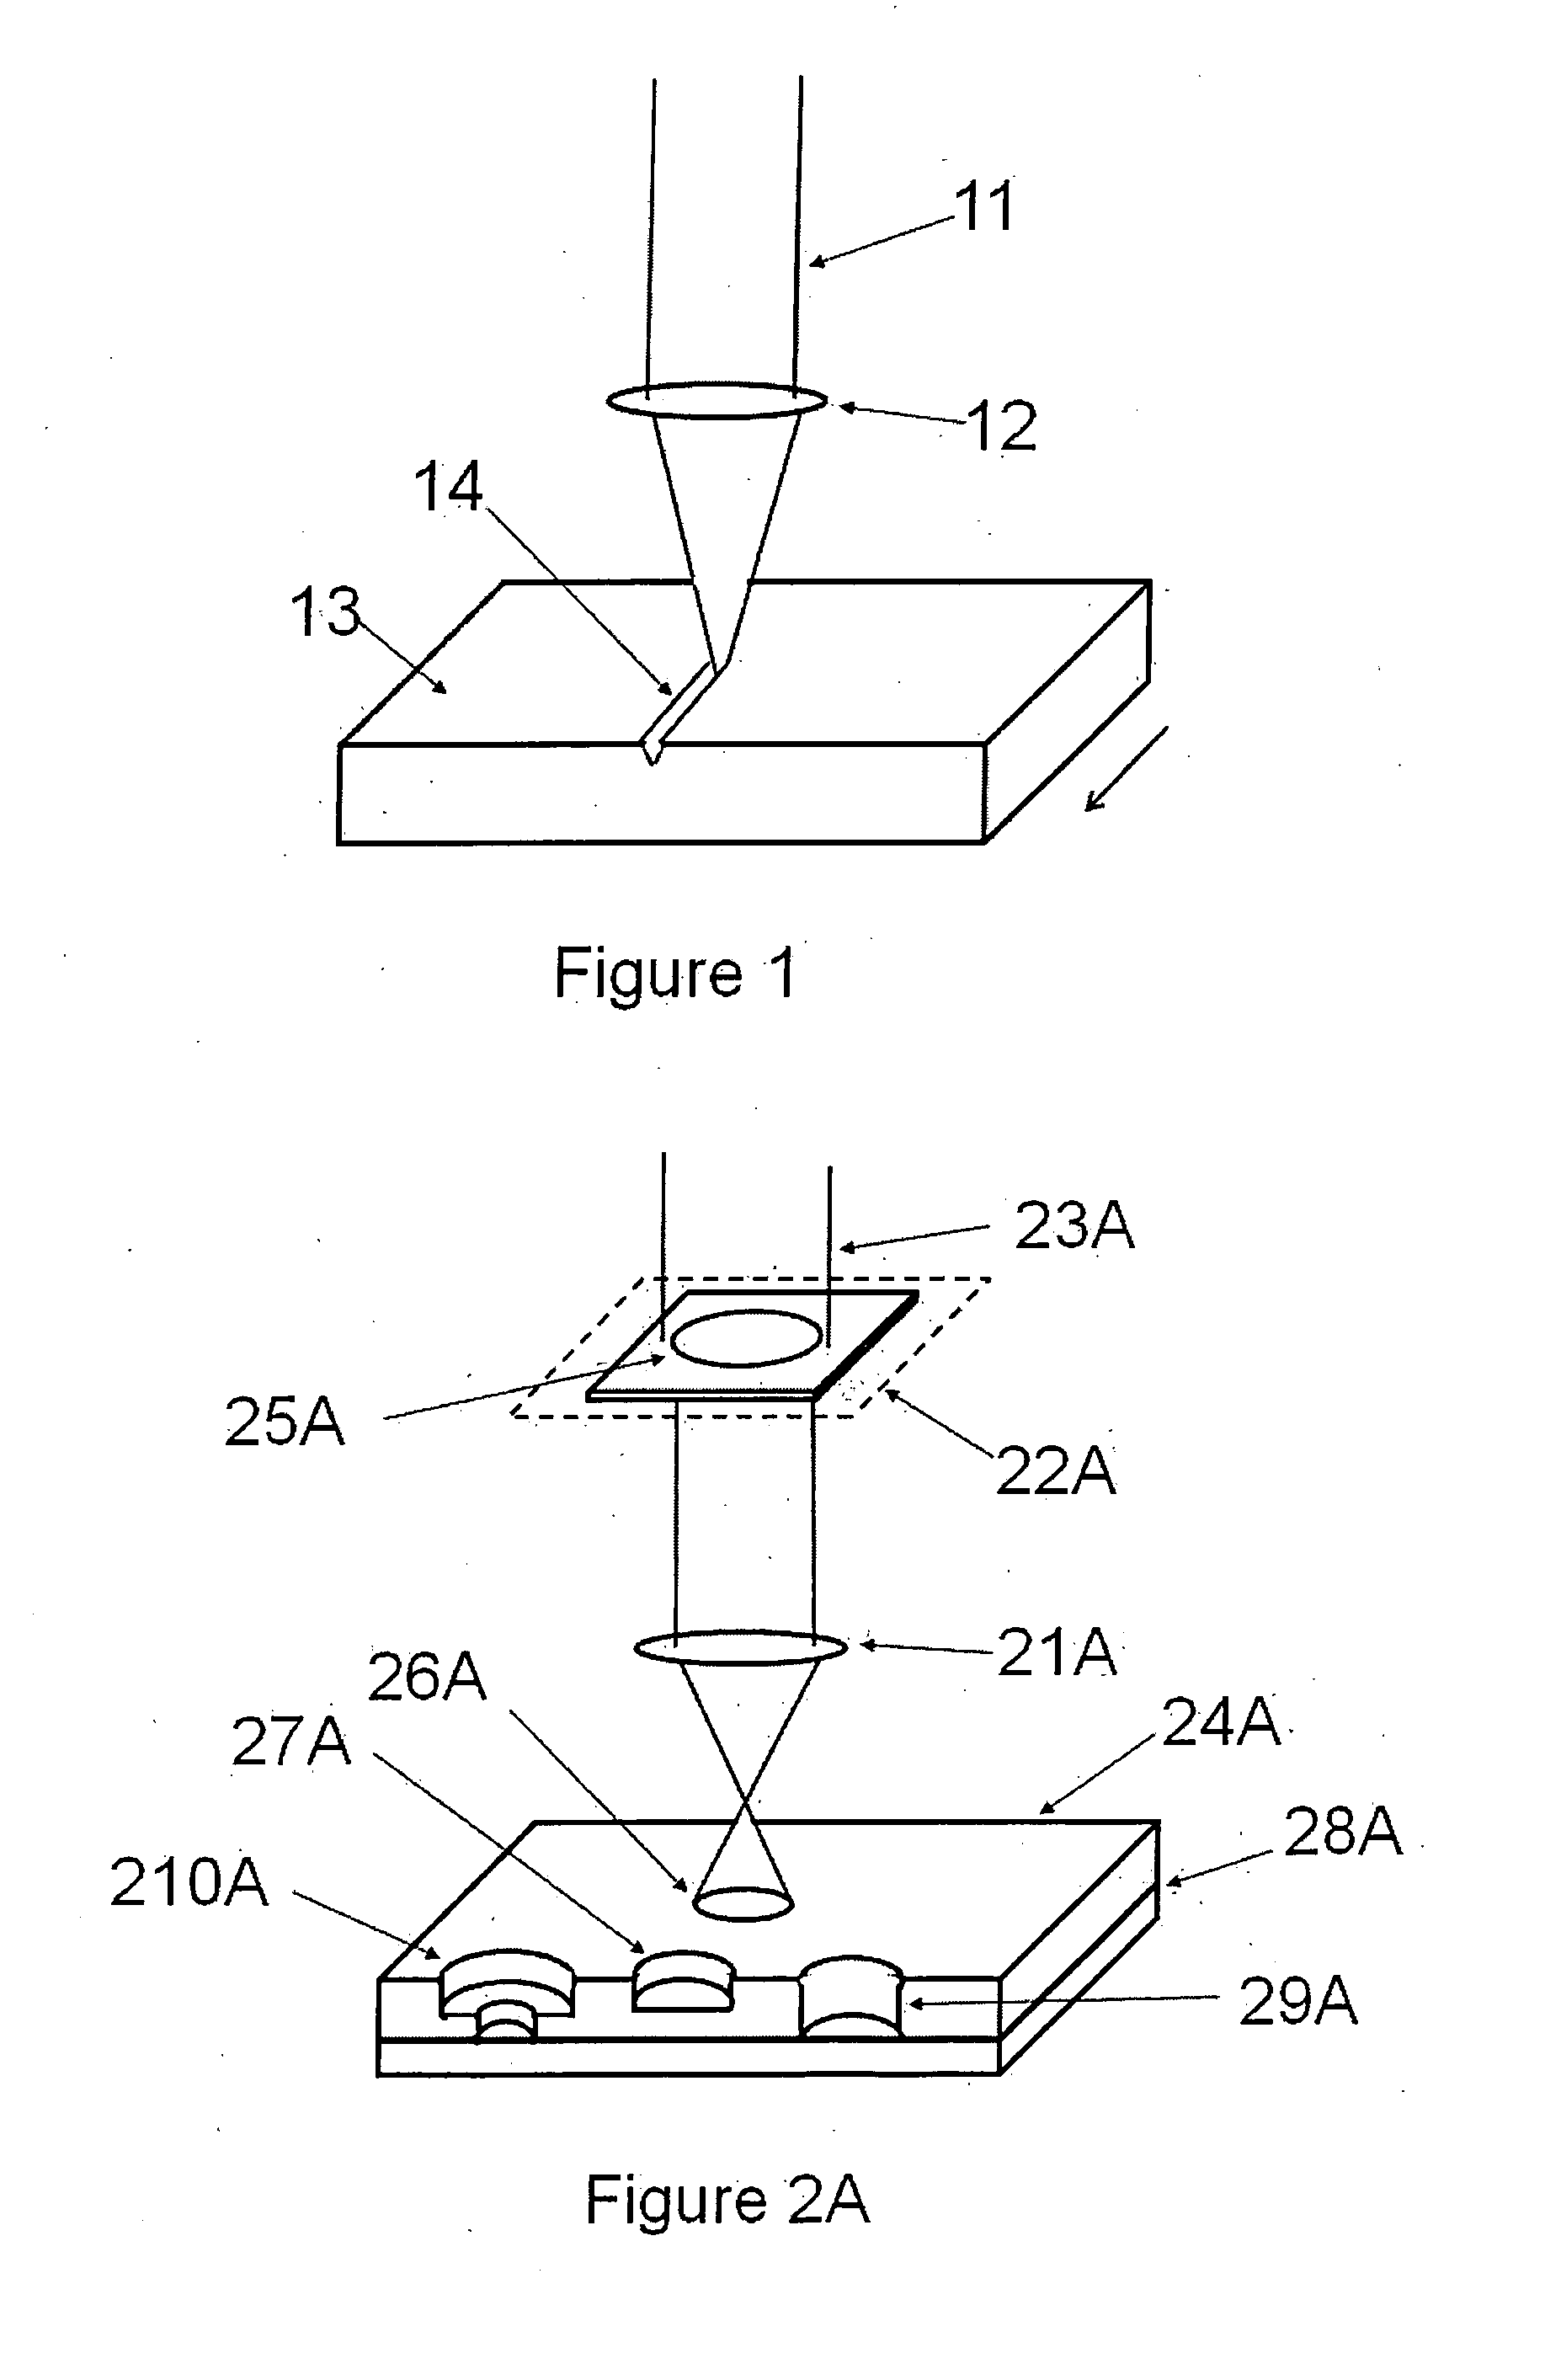 Method and apparatus for laser machining relatively narrow and relatively wide structures